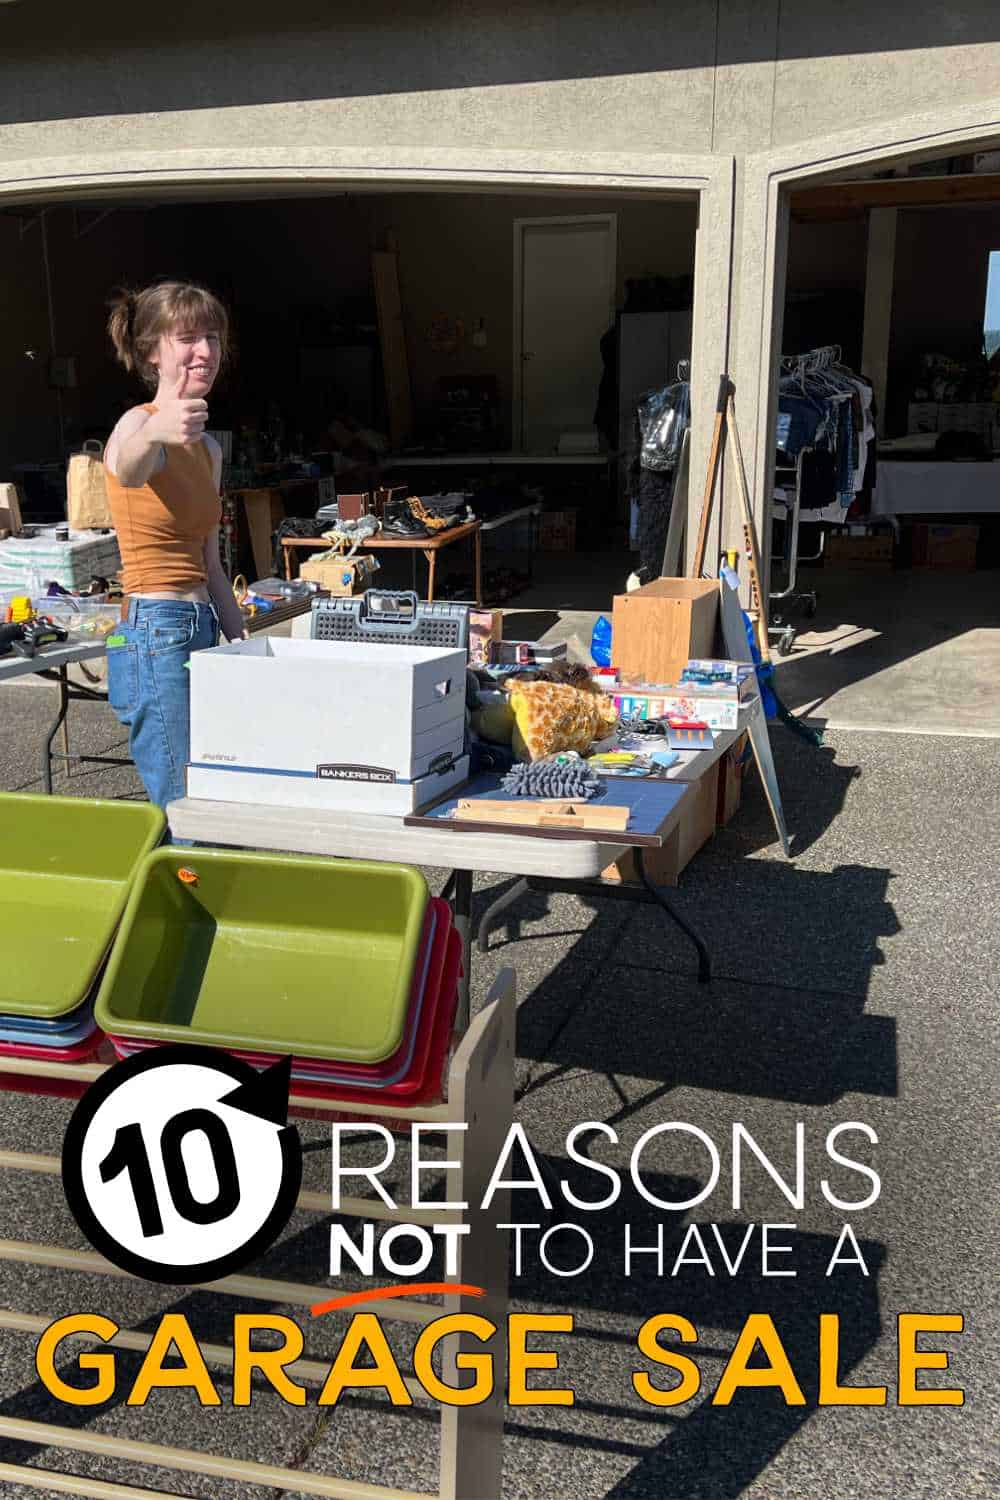 girl giving thumbs up at garage sale text: 10 reasons not to have a garage sale